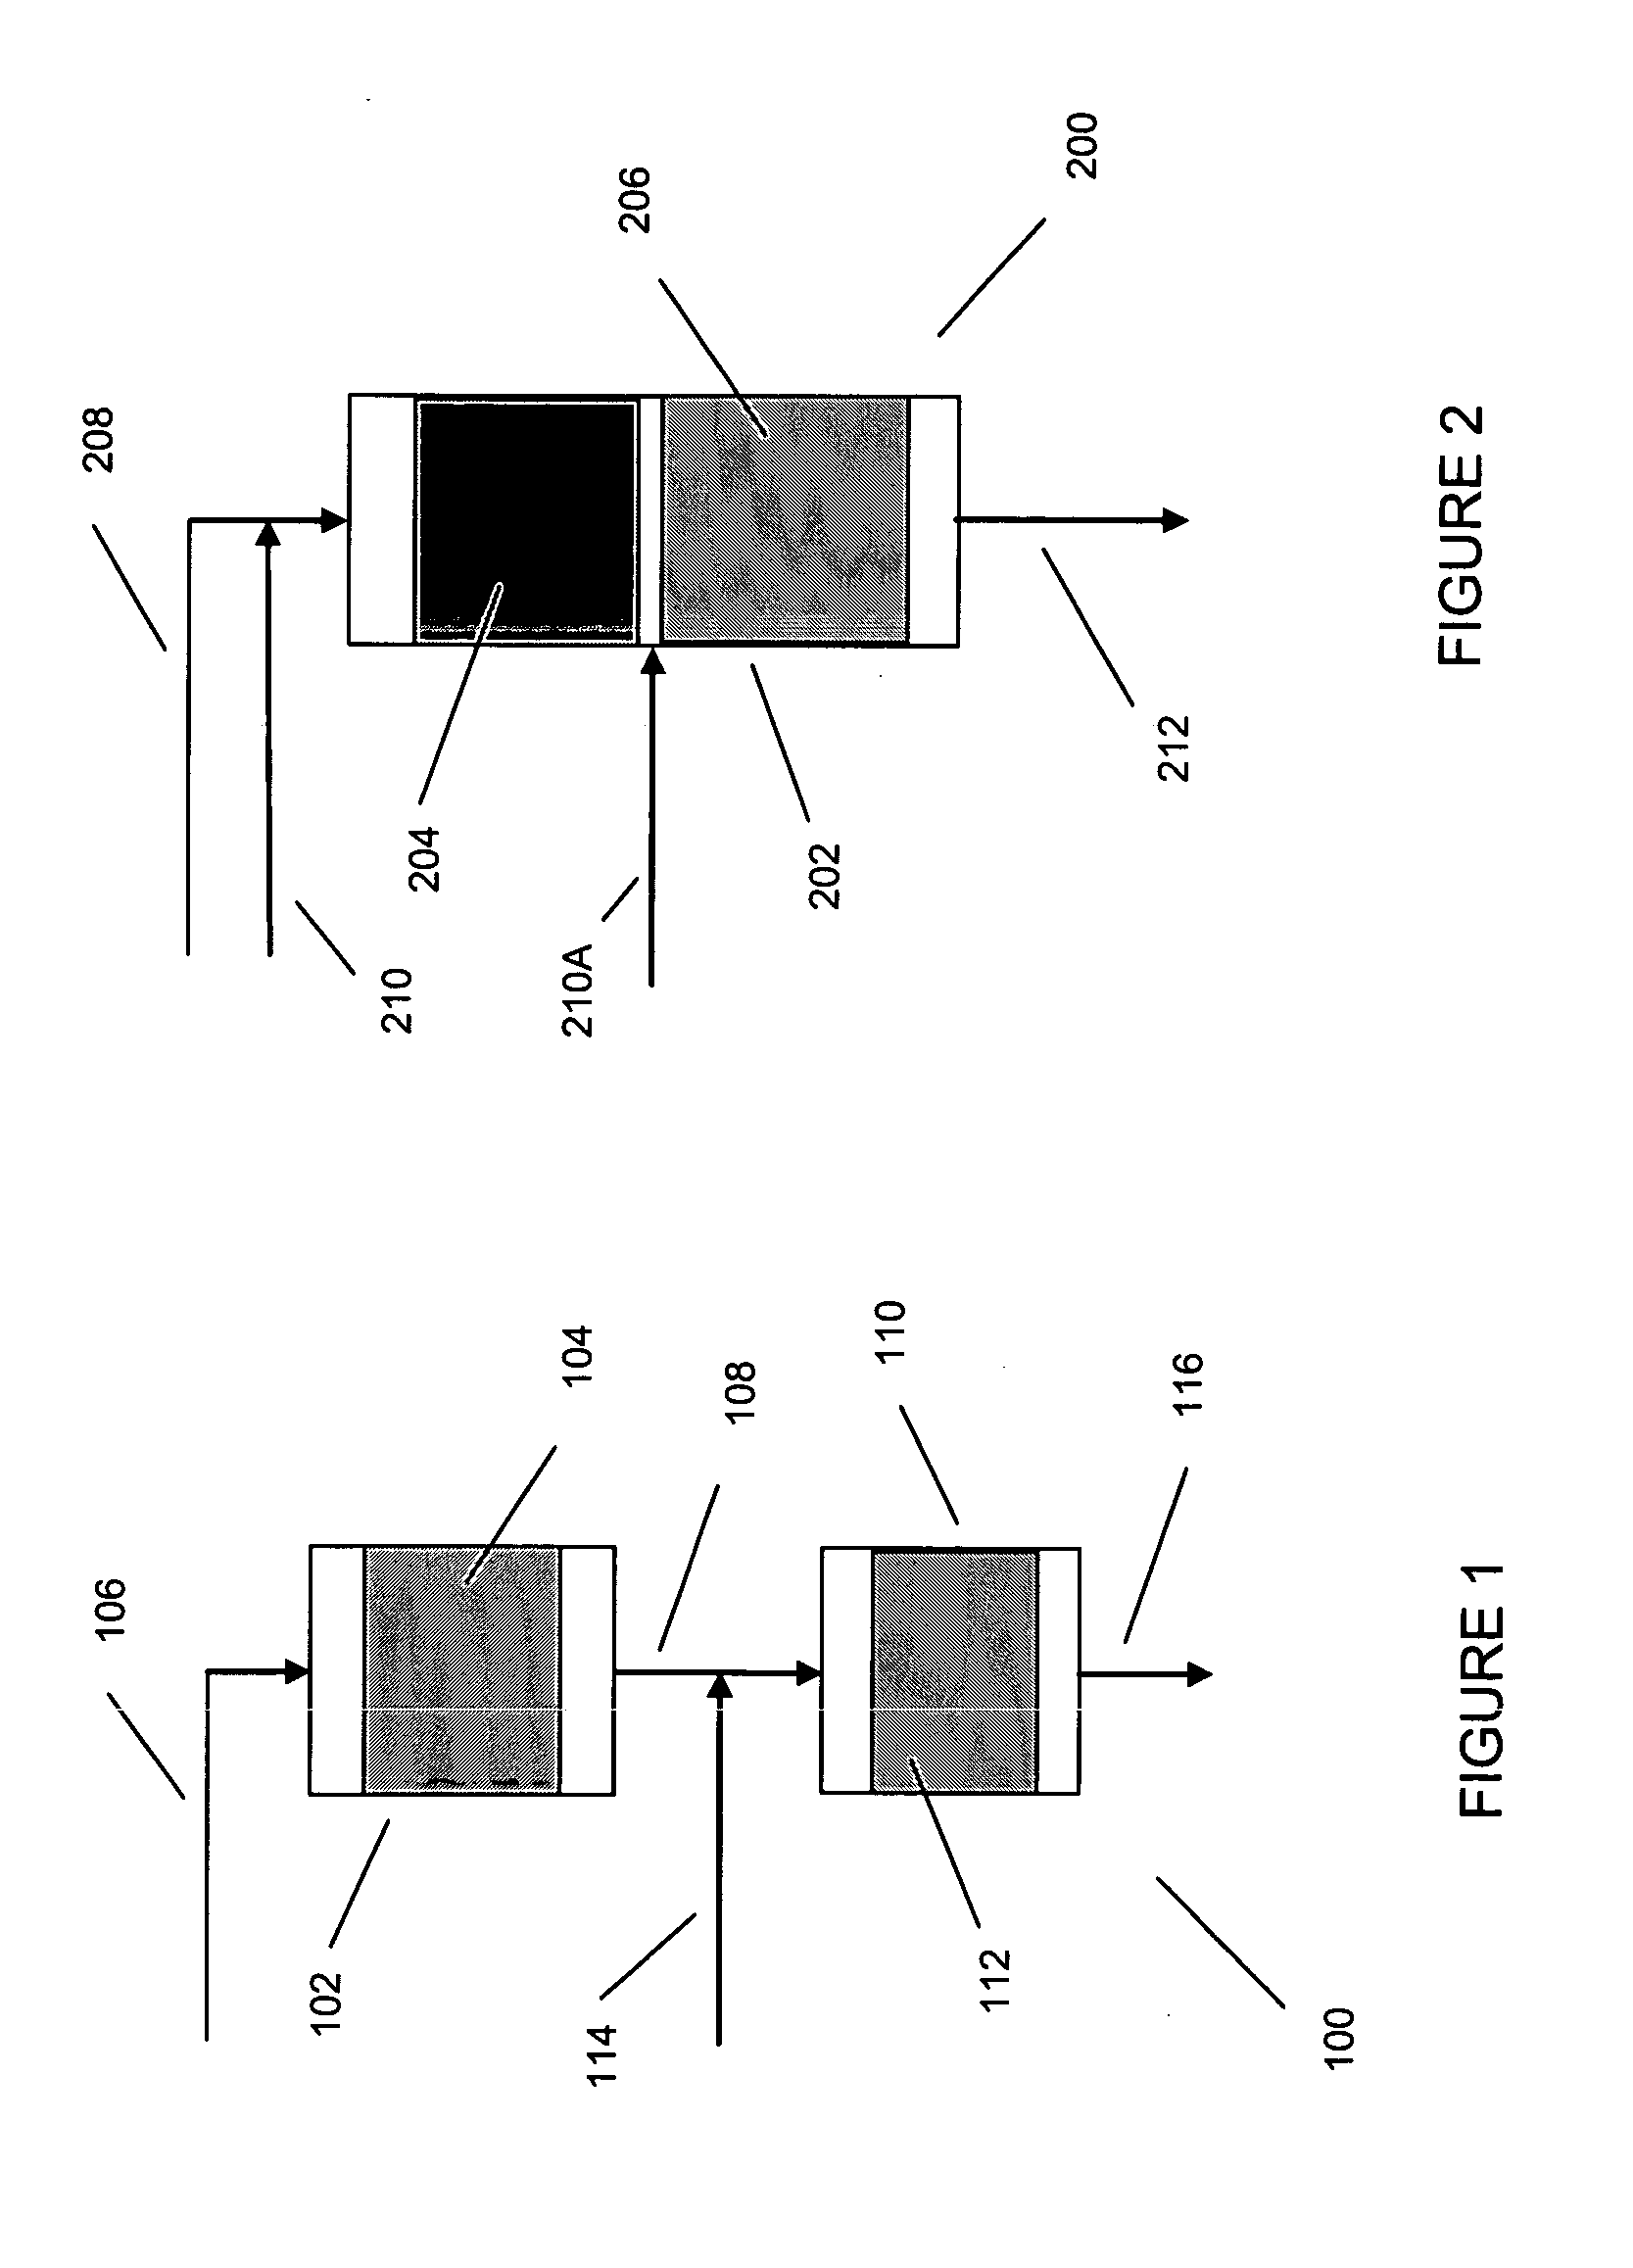 Processes for producing xylenes using isomerization and transalkylation reactions and apparatus therefor